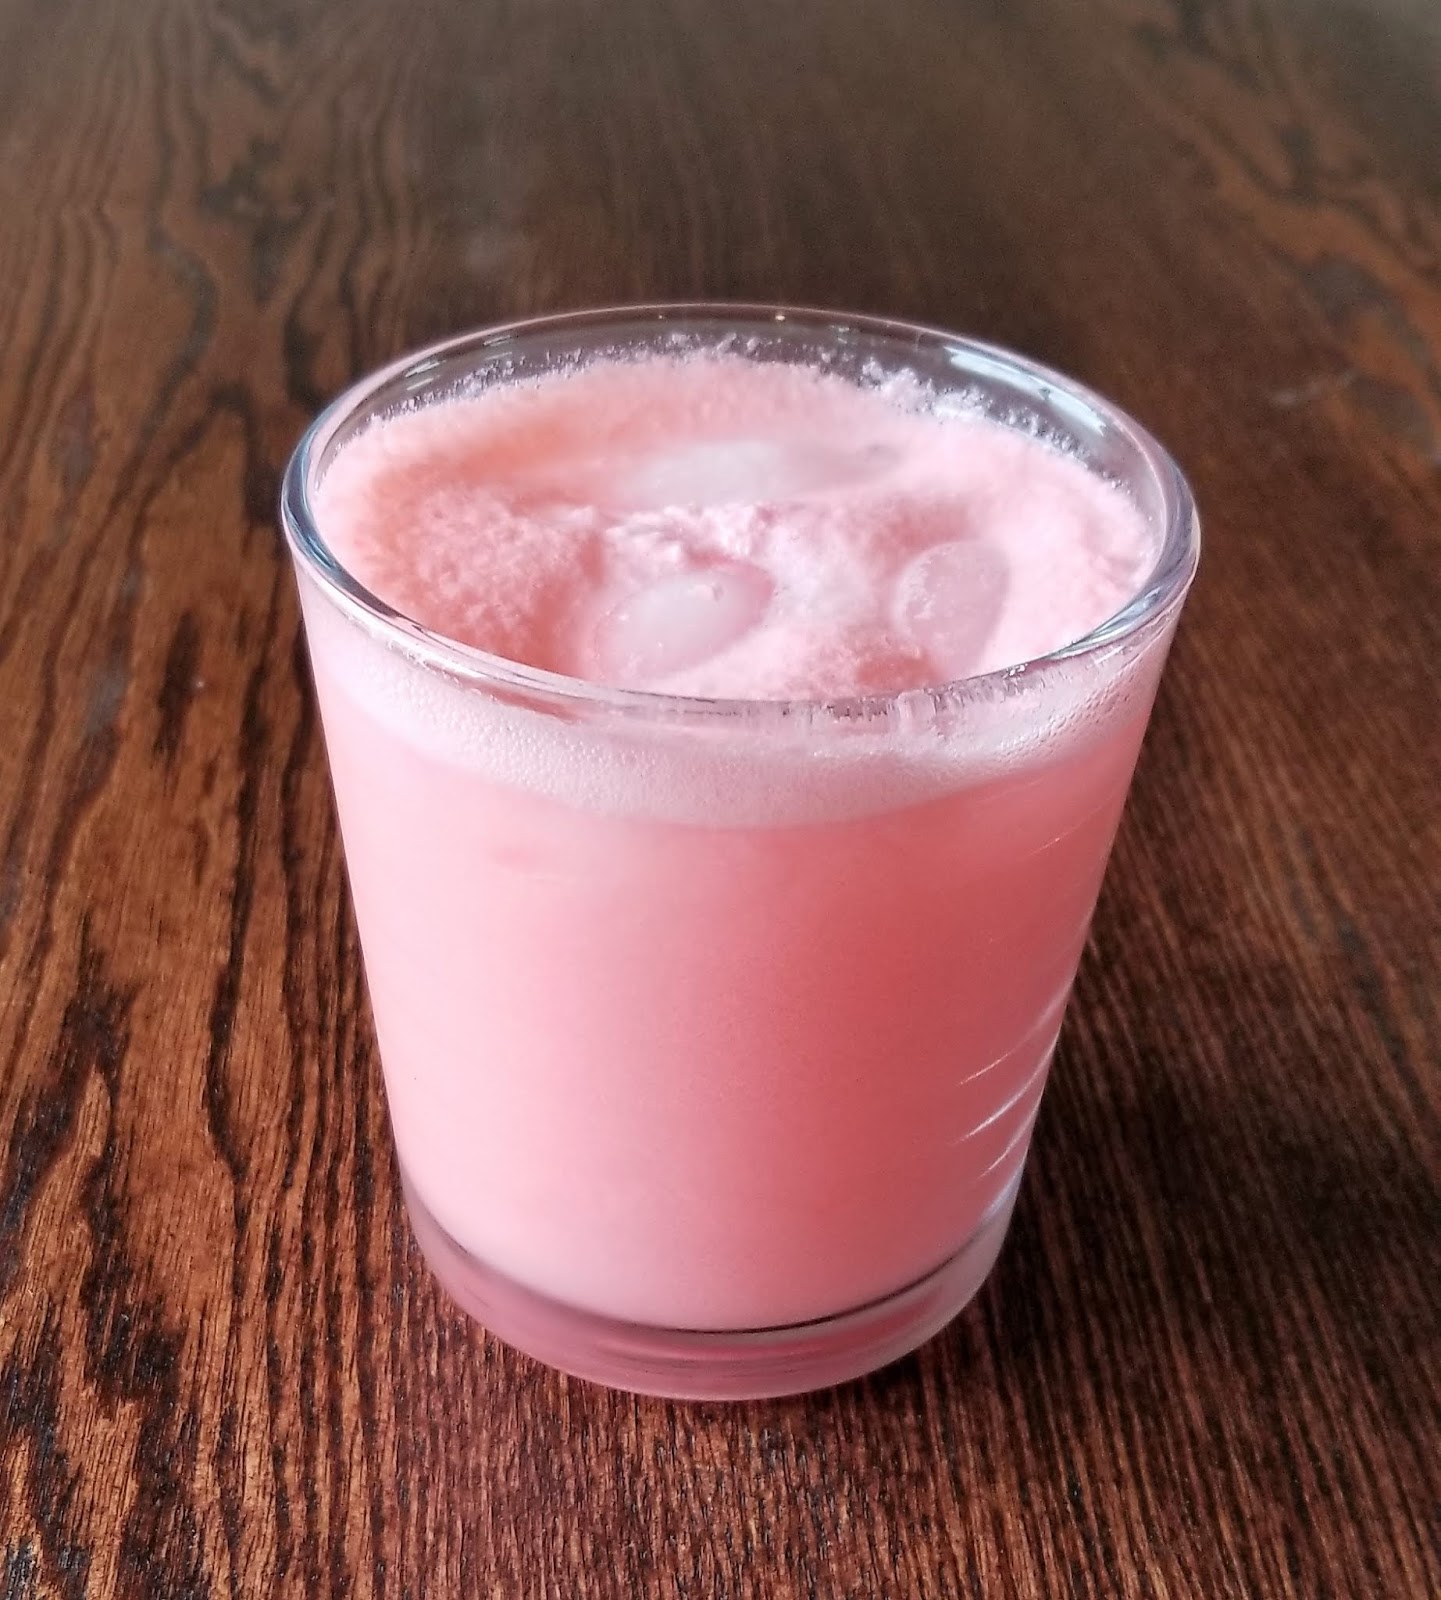 Once Daily DIY: Pink Flamingo Drink